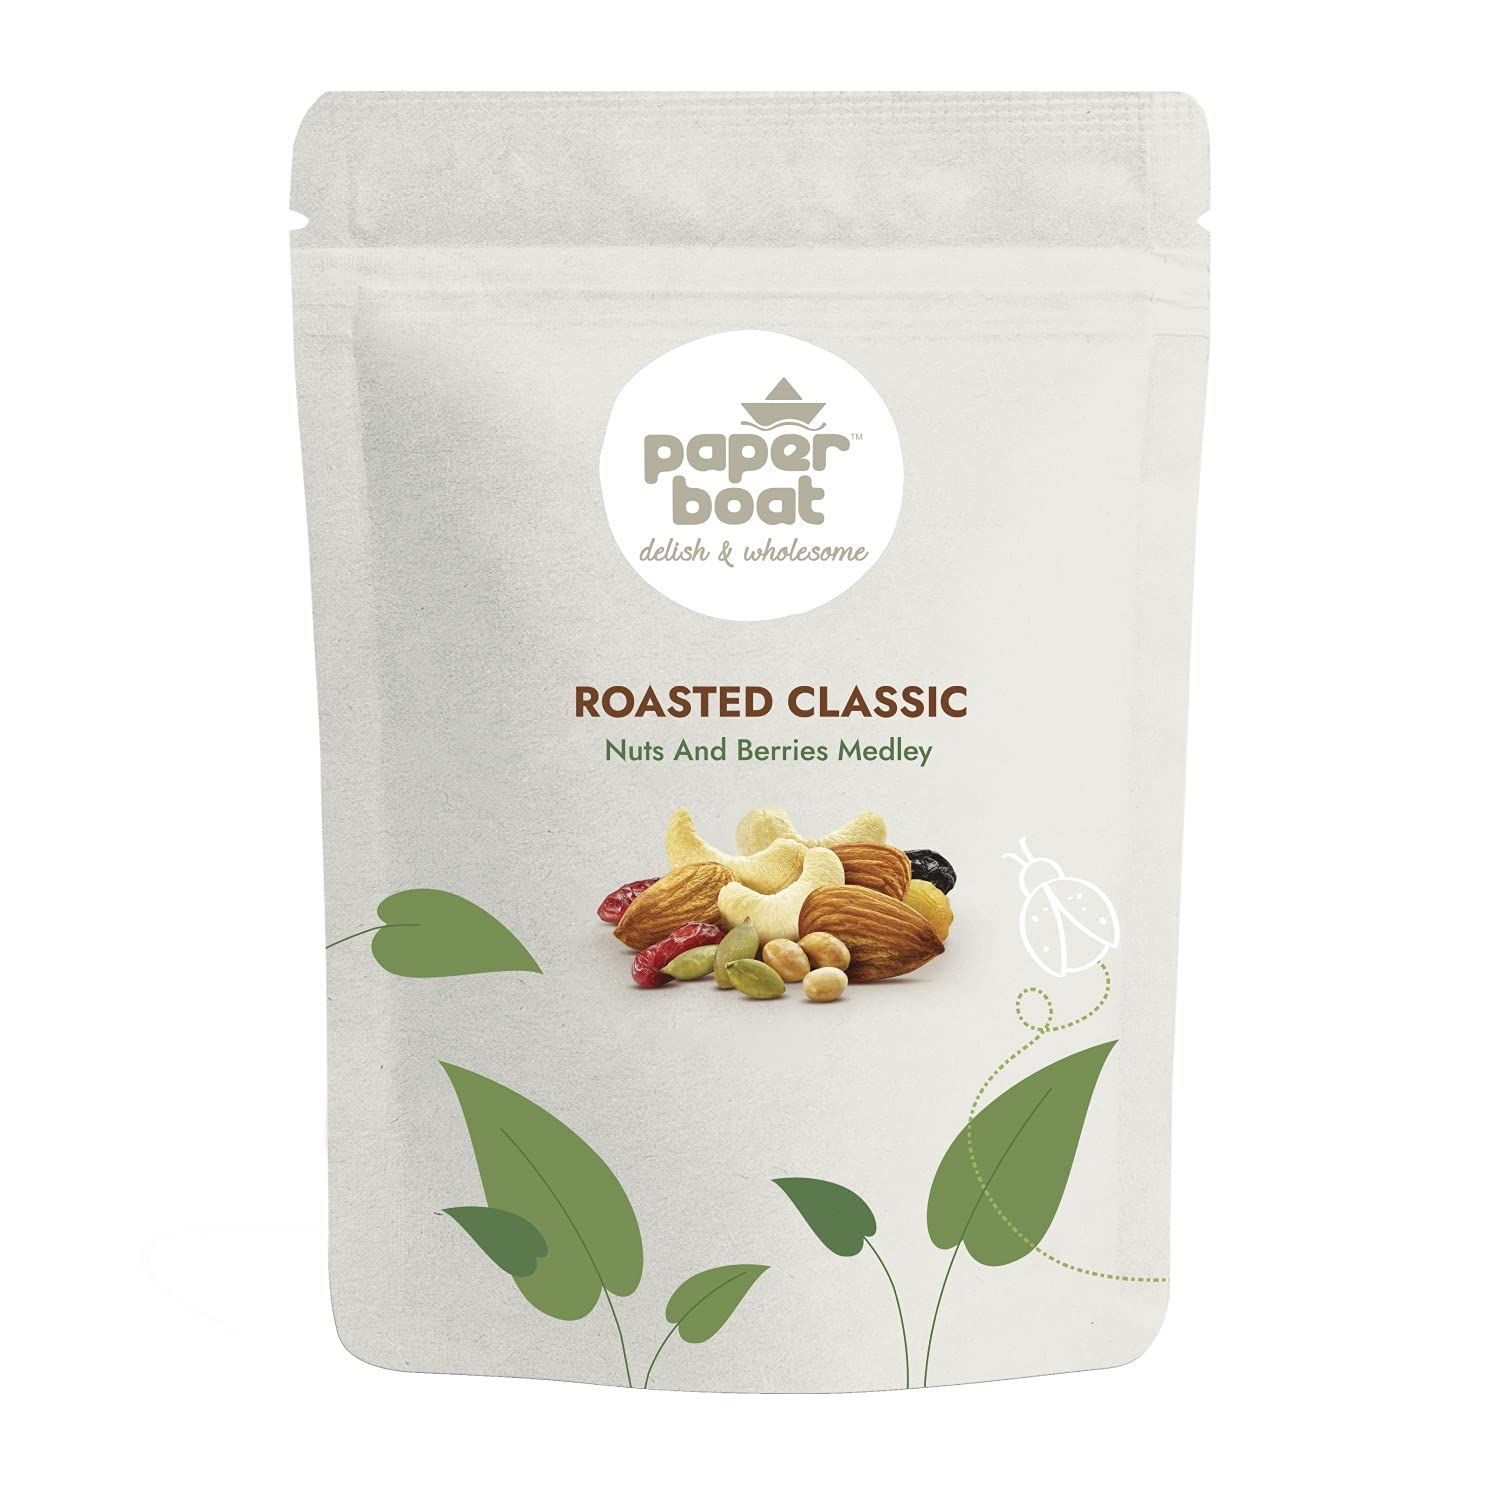 Paper Boat Classic Roasted Nuts & Berries Medley Trail Mix Image